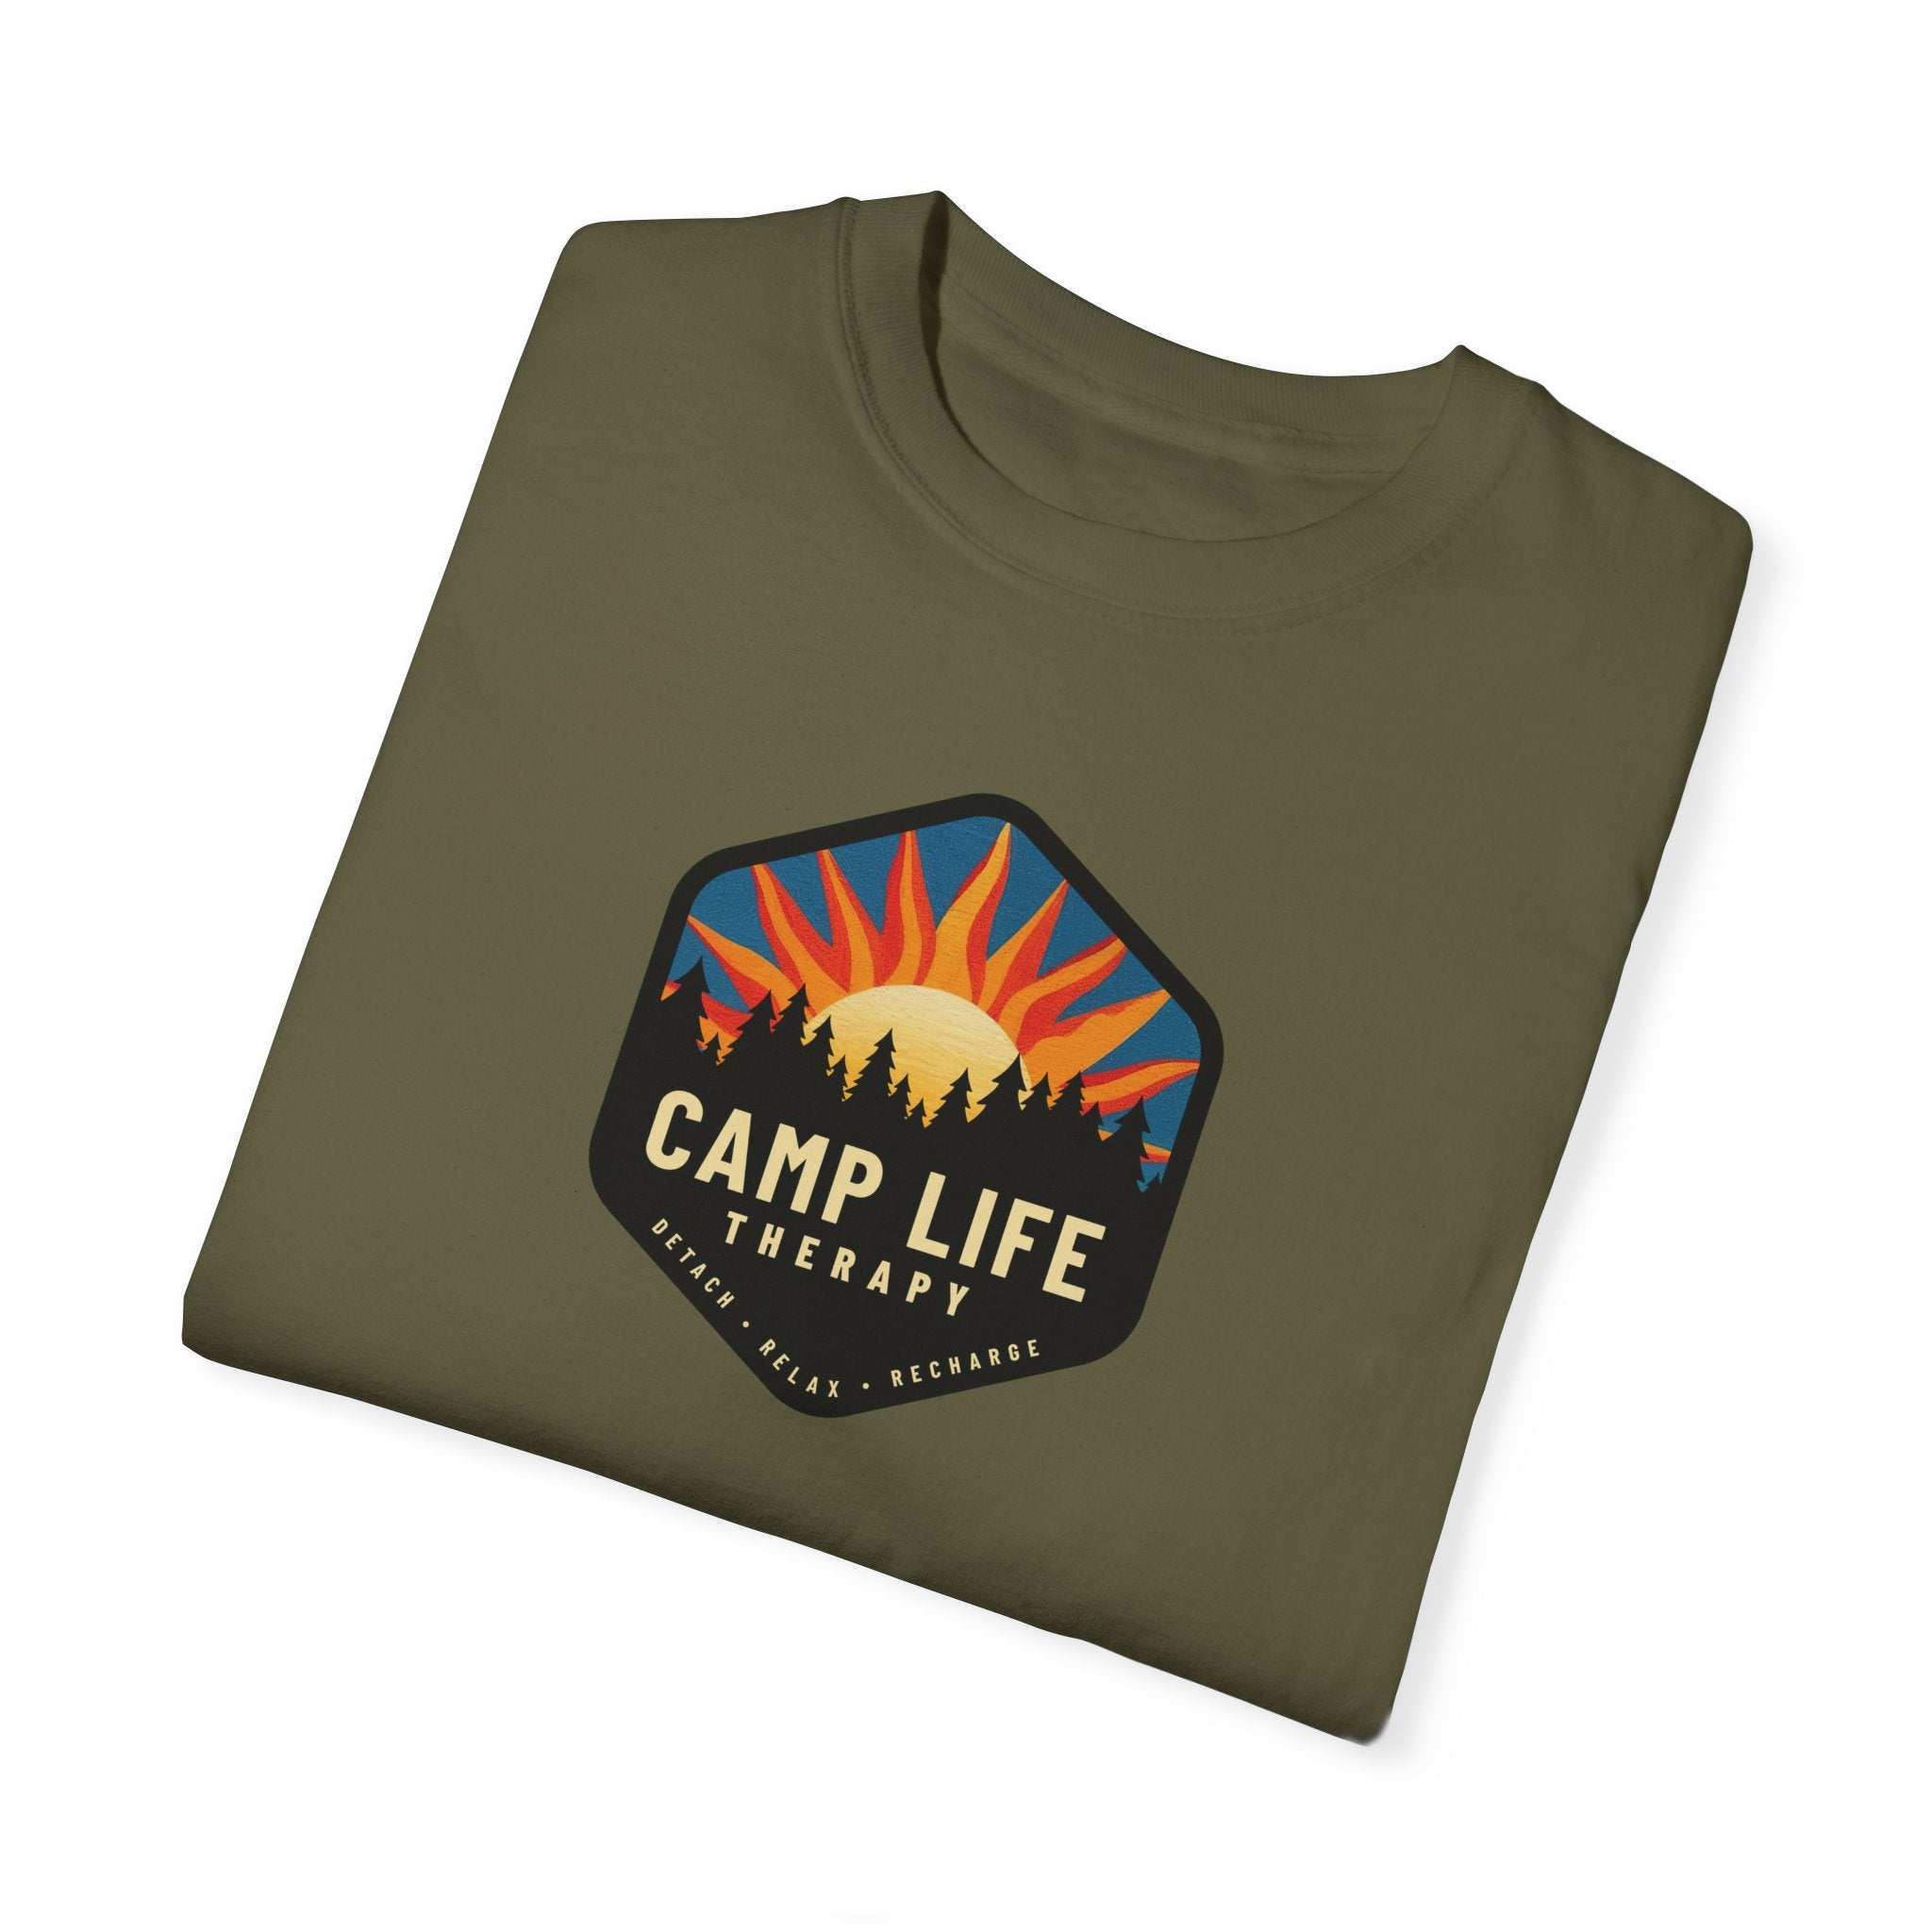 Morning Rays - T-Shirt (Vintage Look Comfort Colors)